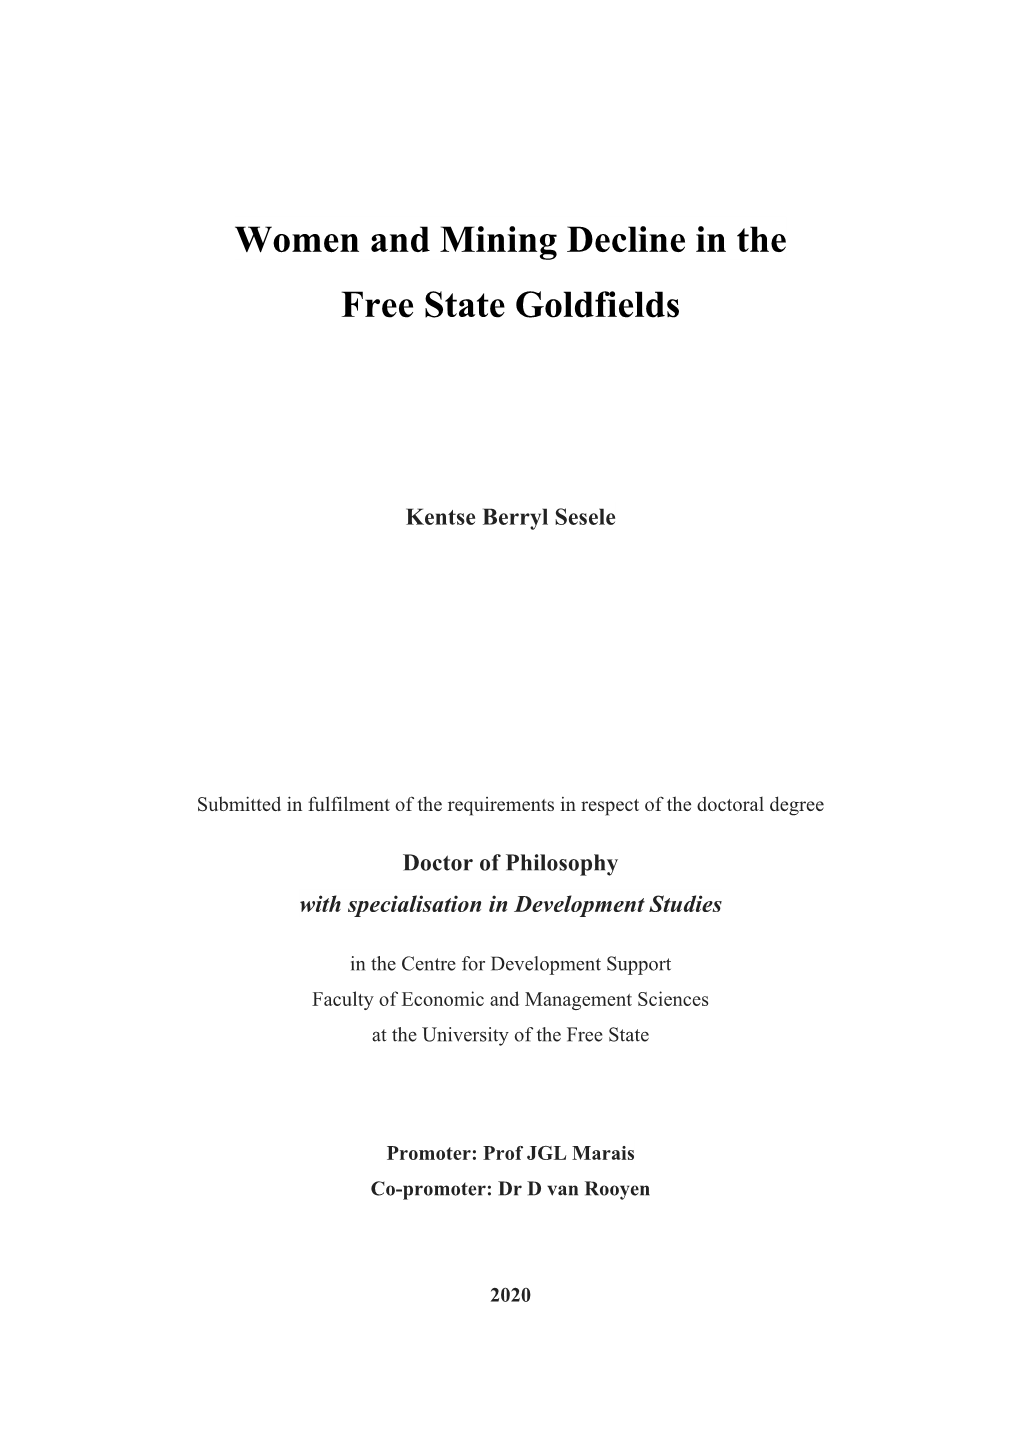 Women and Mining Decline in the Free State Goldfields